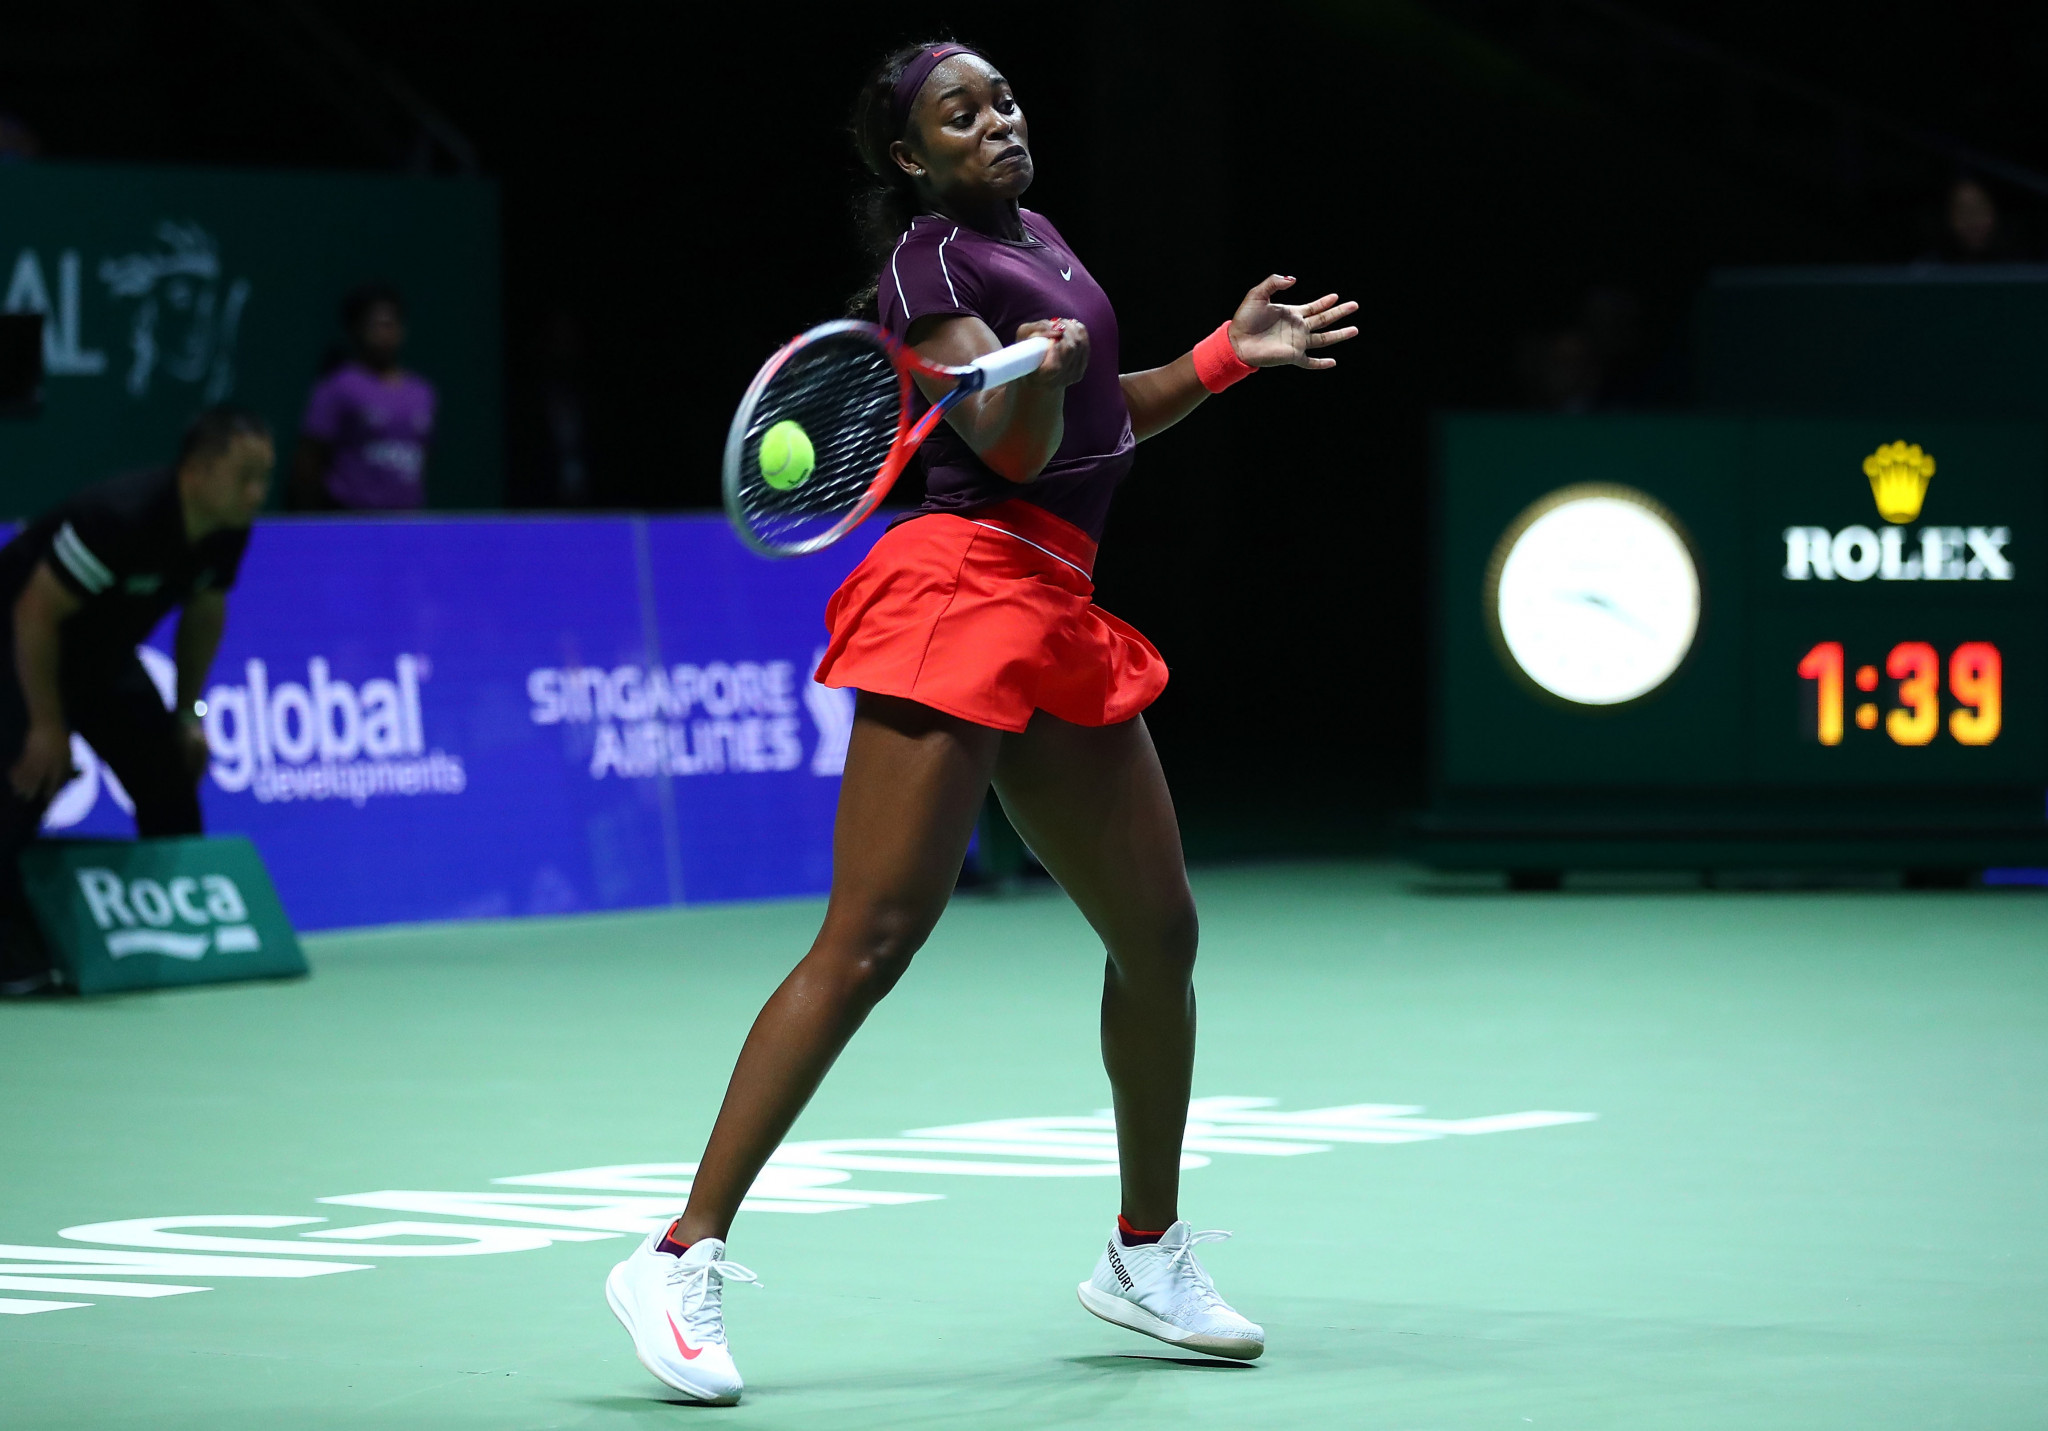 Stephens fights back to set up Svitolina clash at WTA Finals